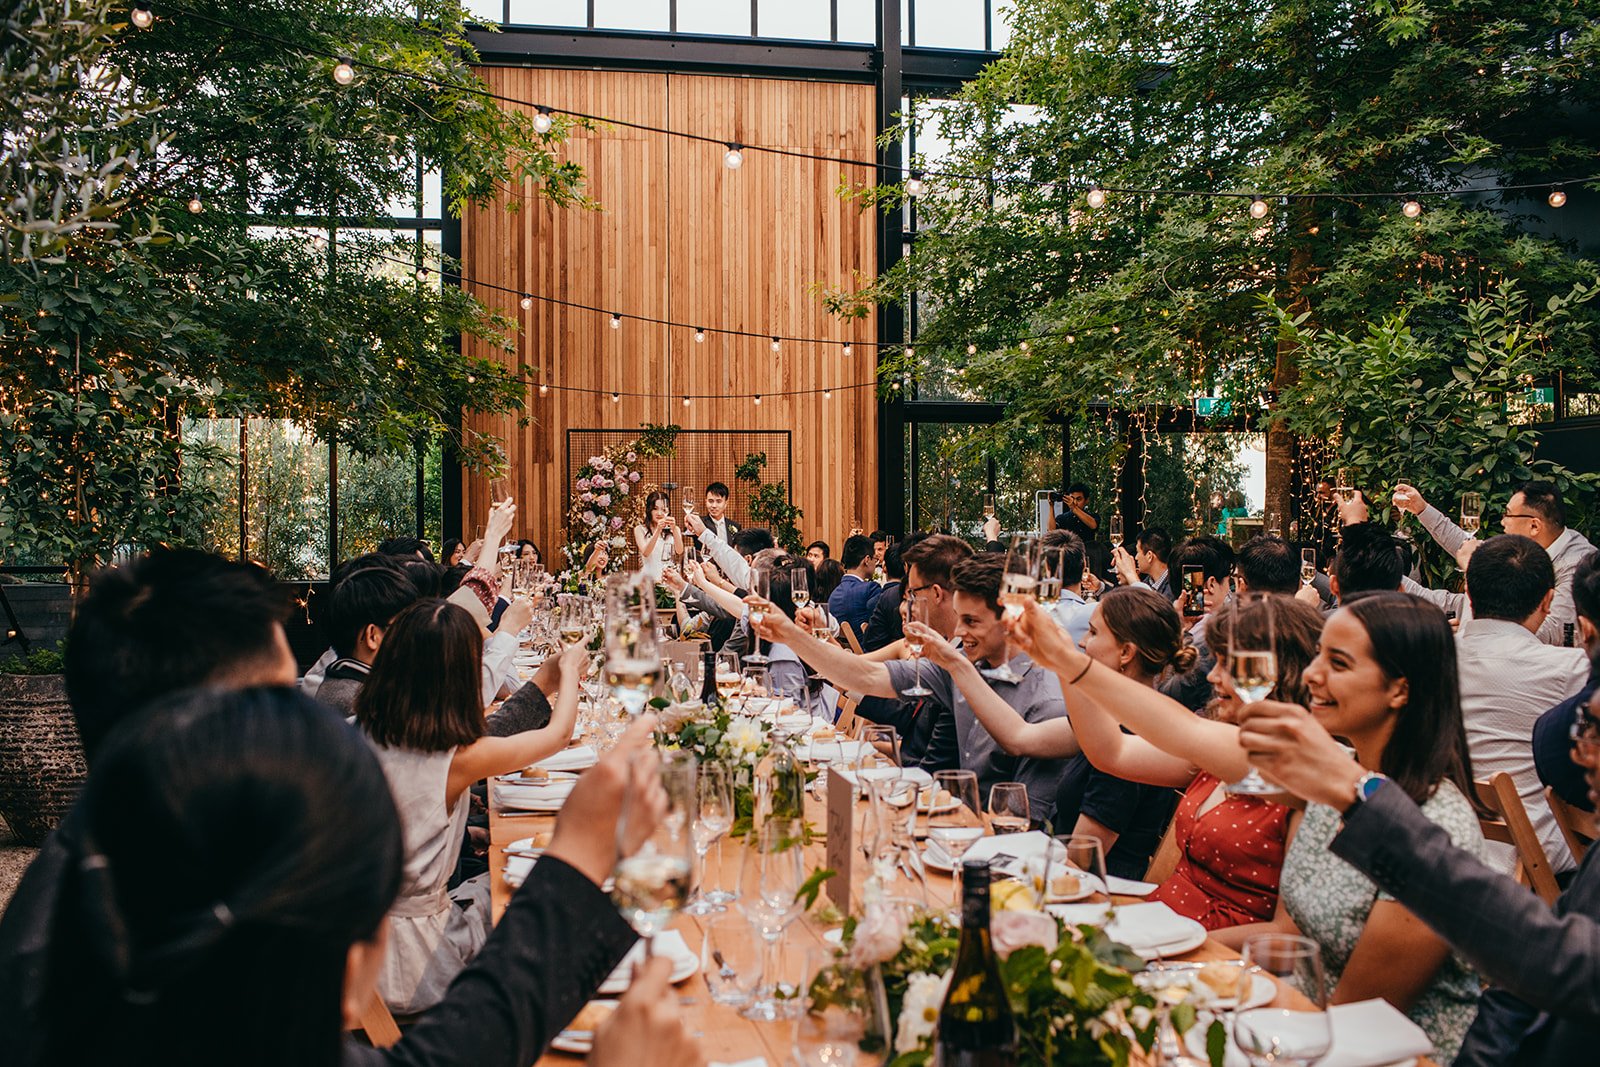 glasshouse-morningside-top-auckland-wedding-phtographer-photography-videography-film-new-zealand-NZ-best-urban-venue-stylish-intimate-central-ceremony-reception-dear-white-productions (37).jpg